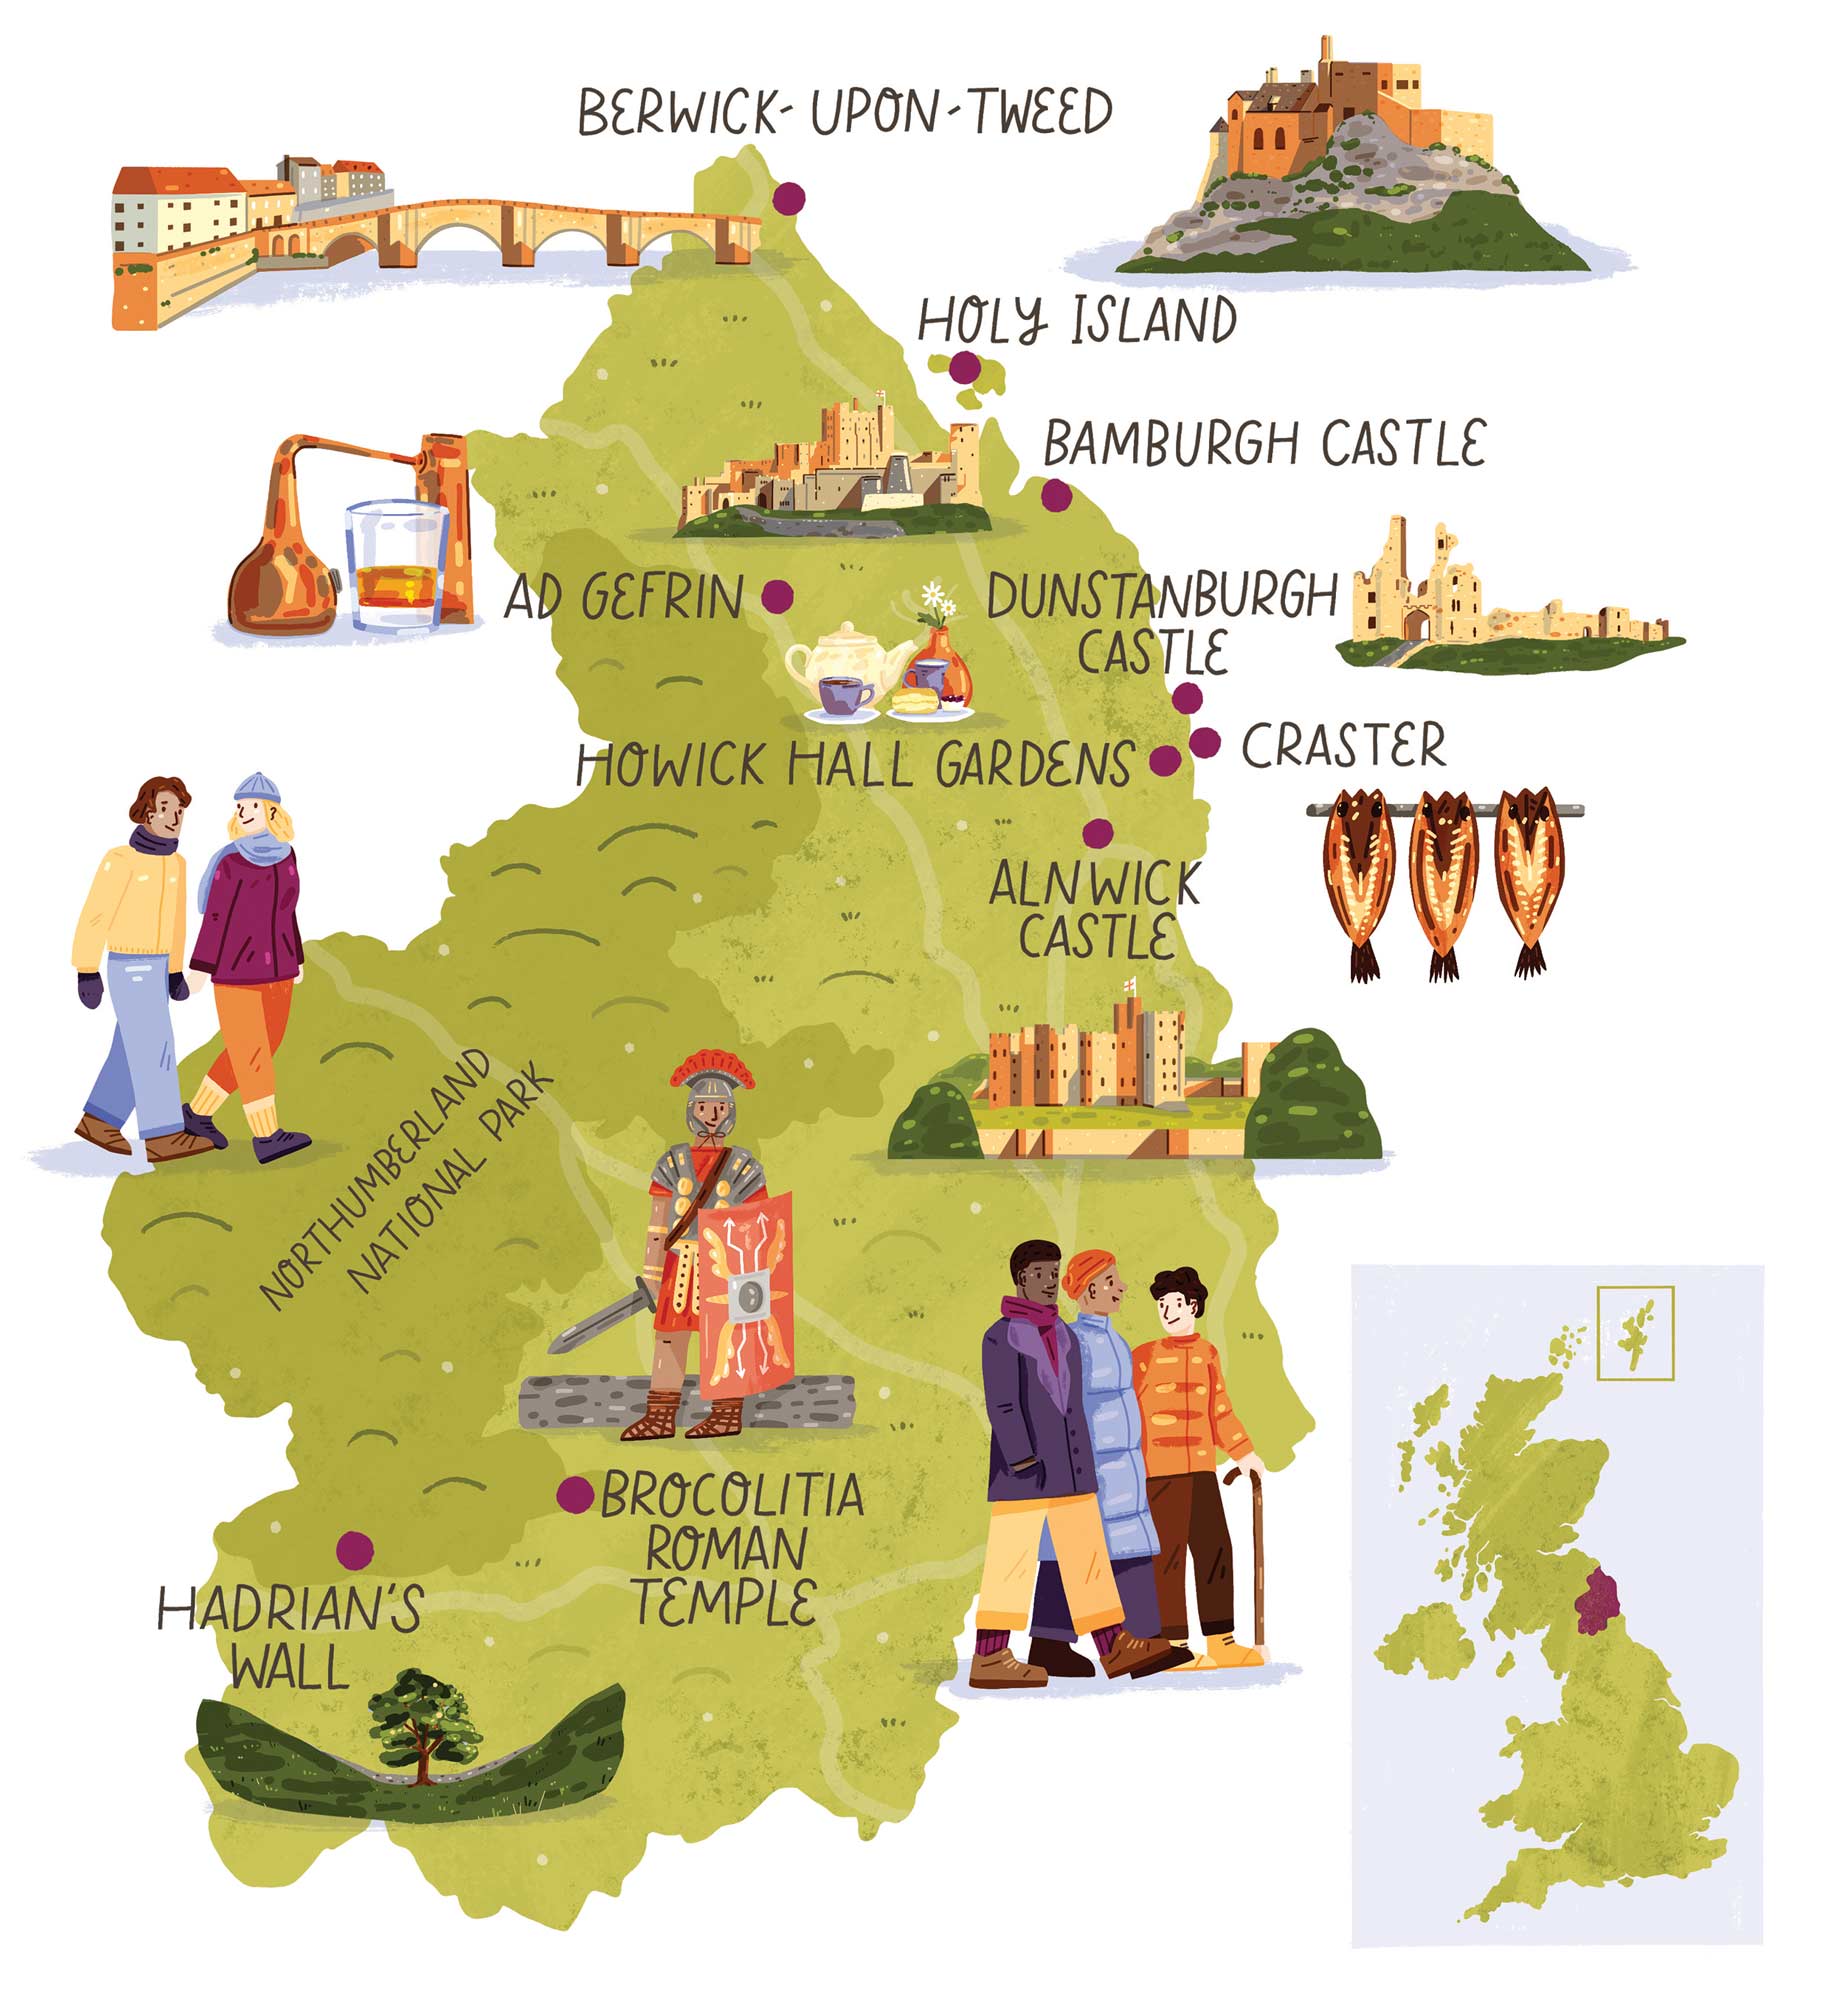 A map of Northumberland for Discover Britain by Elly Jahnz